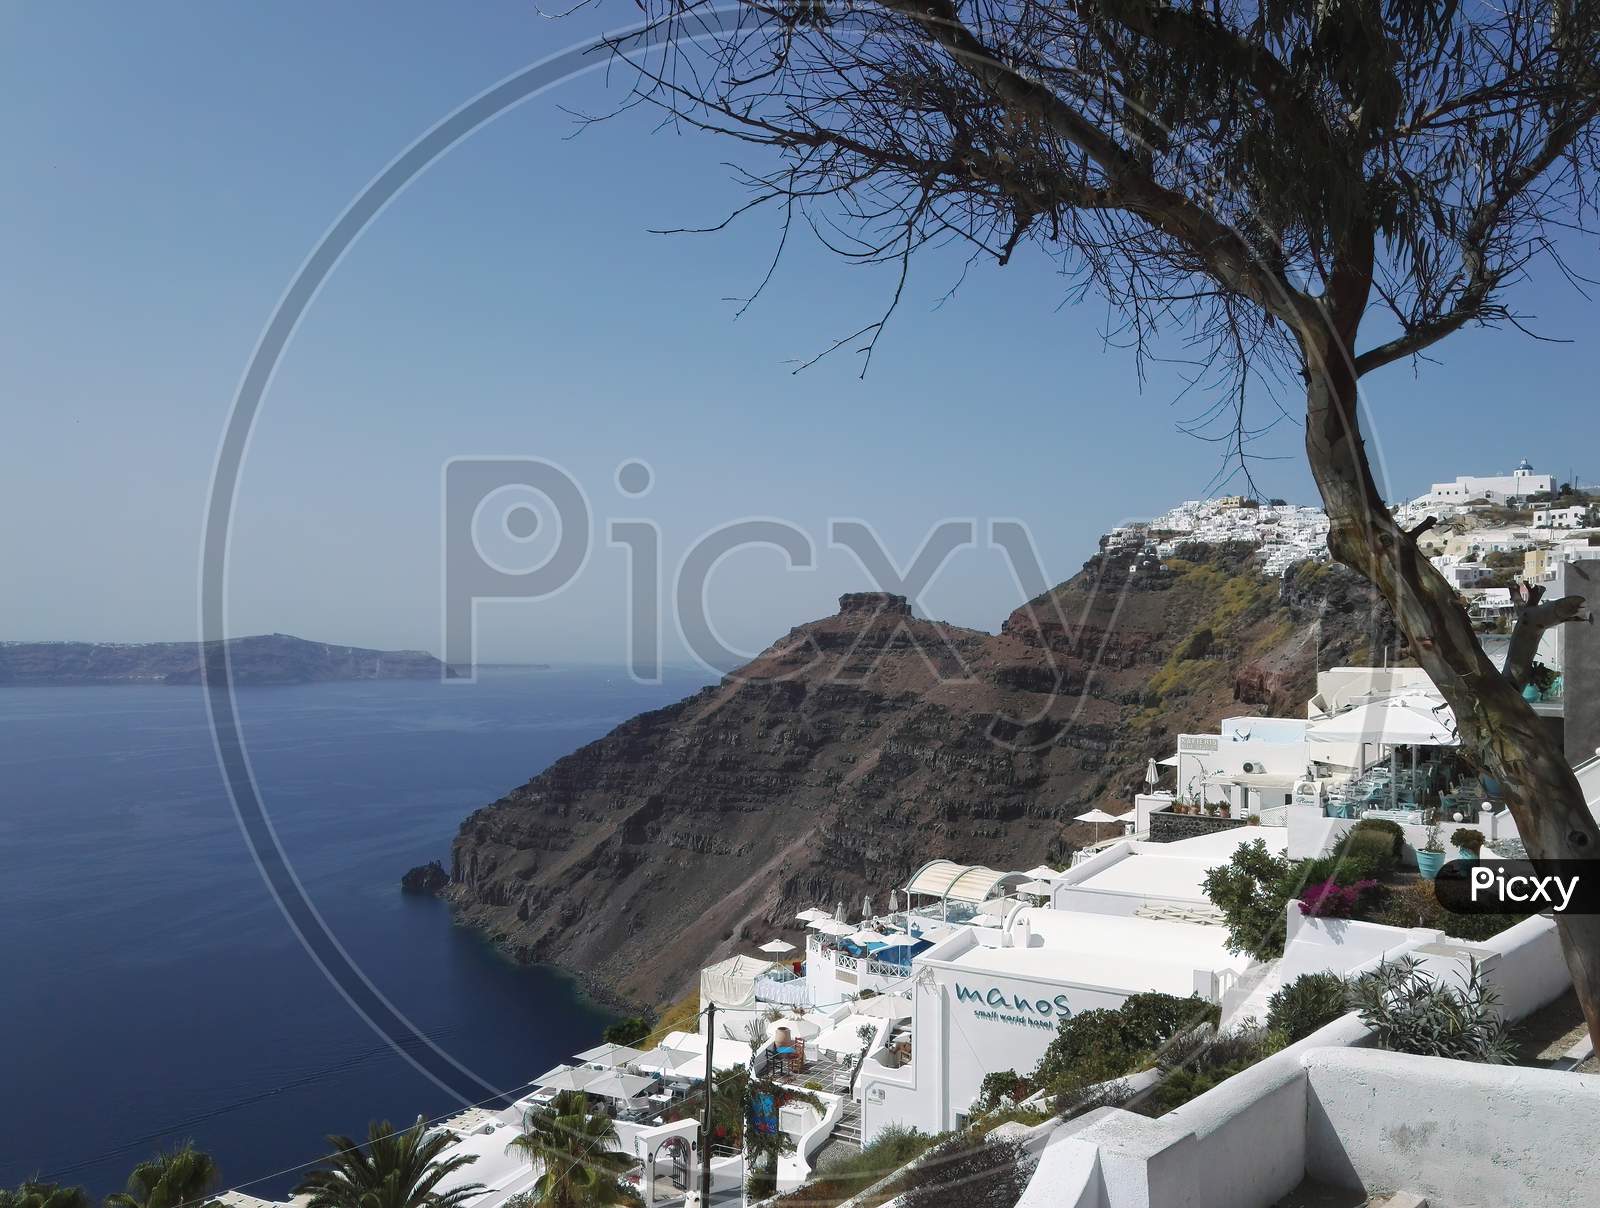 Santorini Sea View. Blue Sea, Sky And White Houses On Coastline Against Red Volcanic Mountain